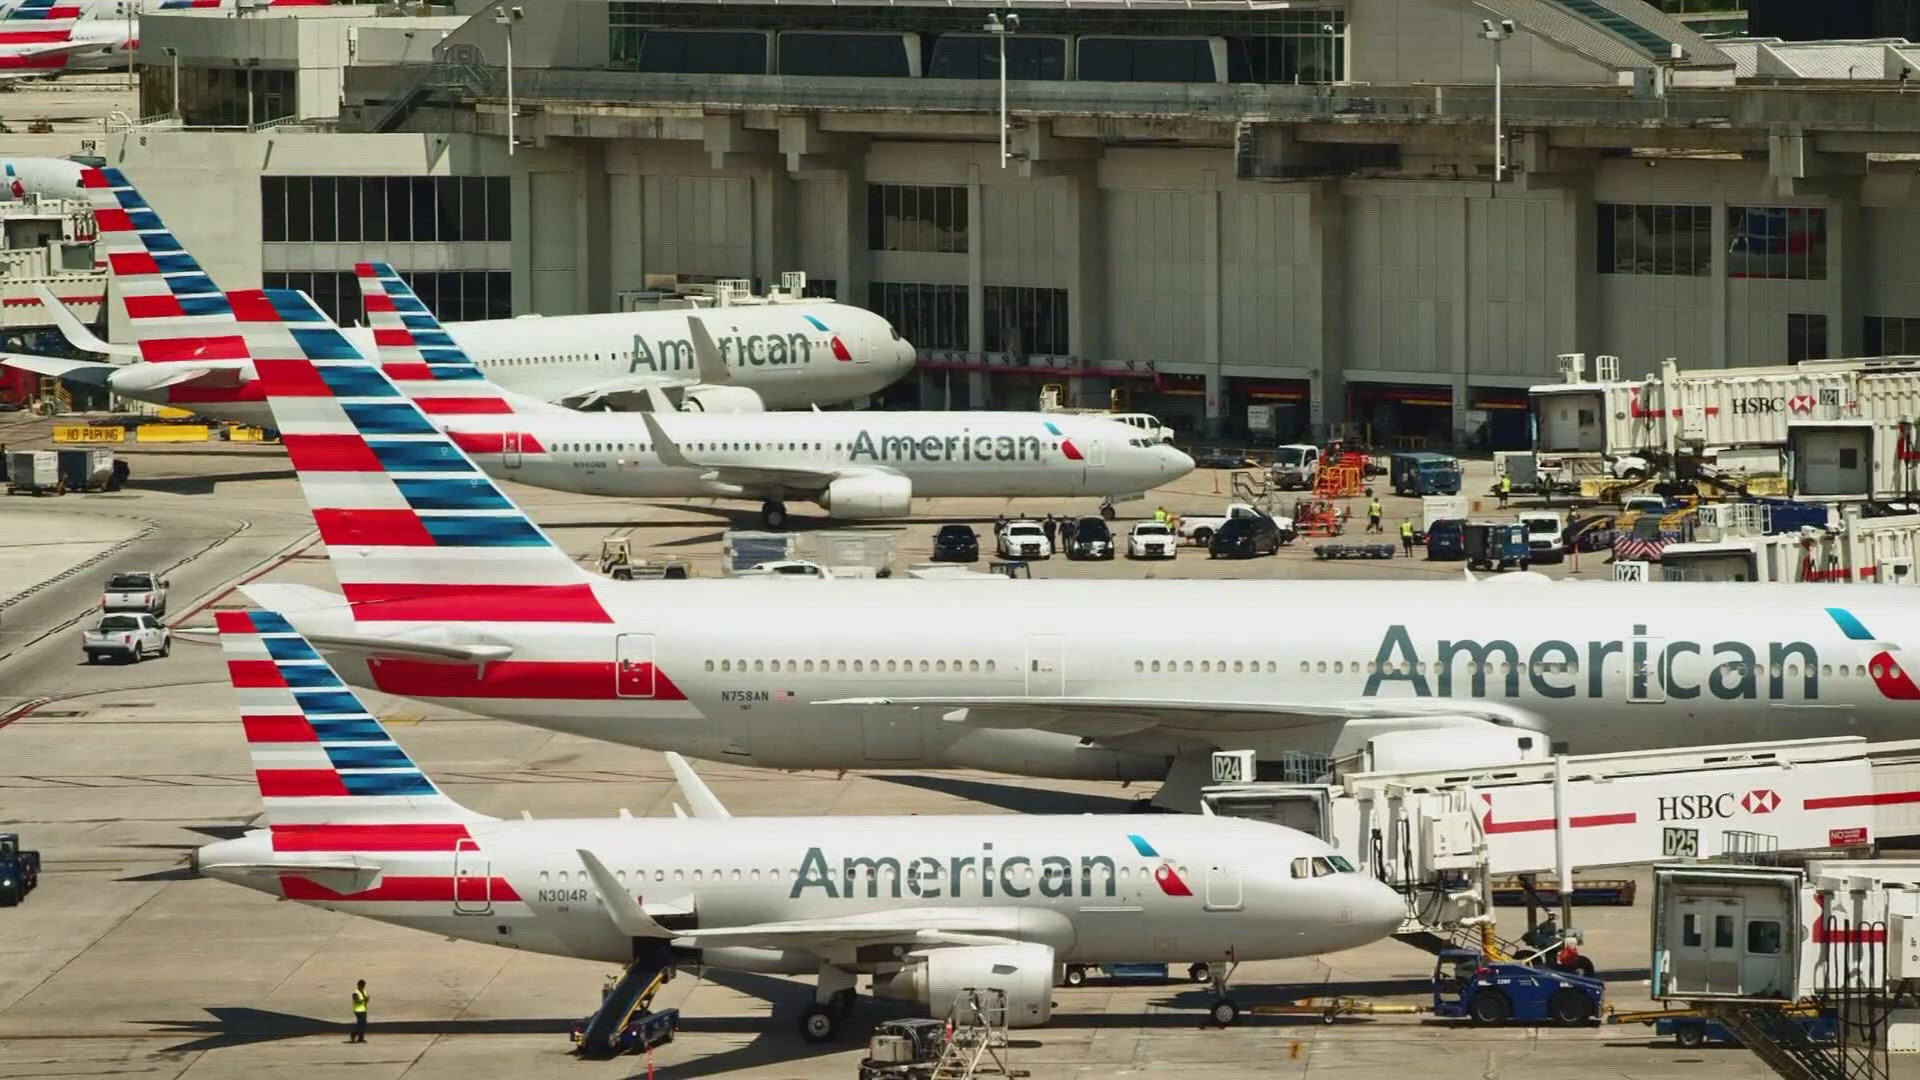 Fort Worth, Texas: American Airlines buying 260 new aircraft | wfaa.com